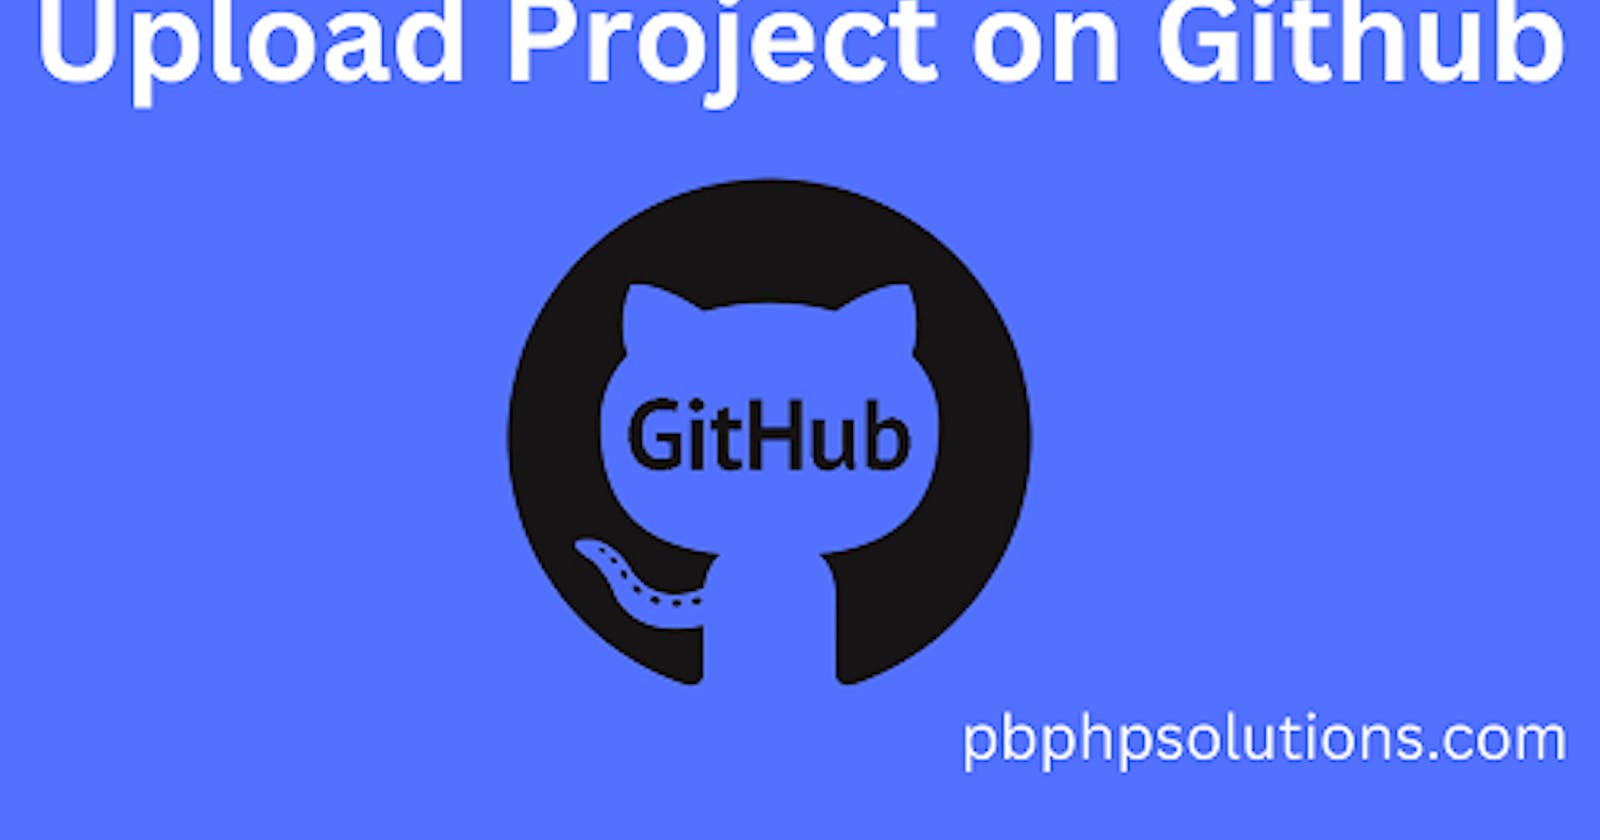 How to upload project on GitHub